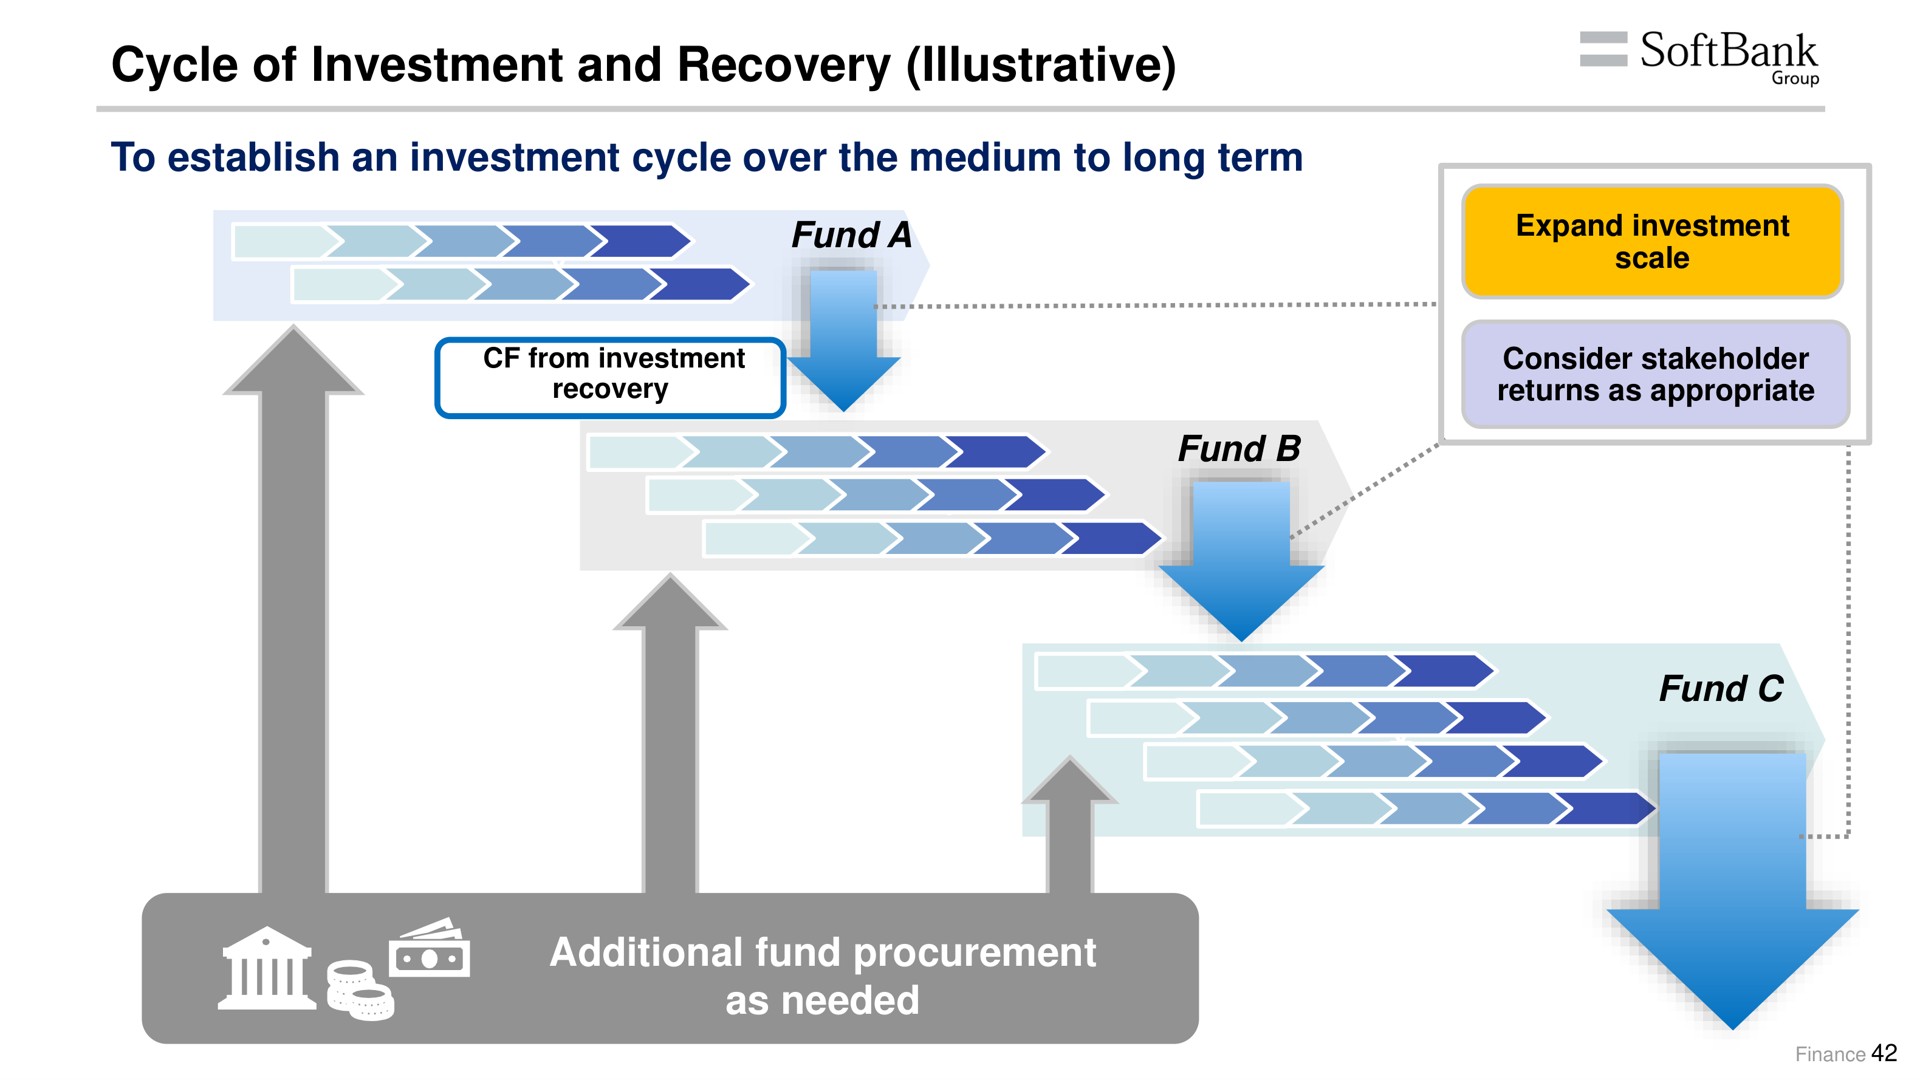 cycle of investment and recovery illustrative to establish an investment cycle over the medium to long term additional fund procurement as needed | SoftBank